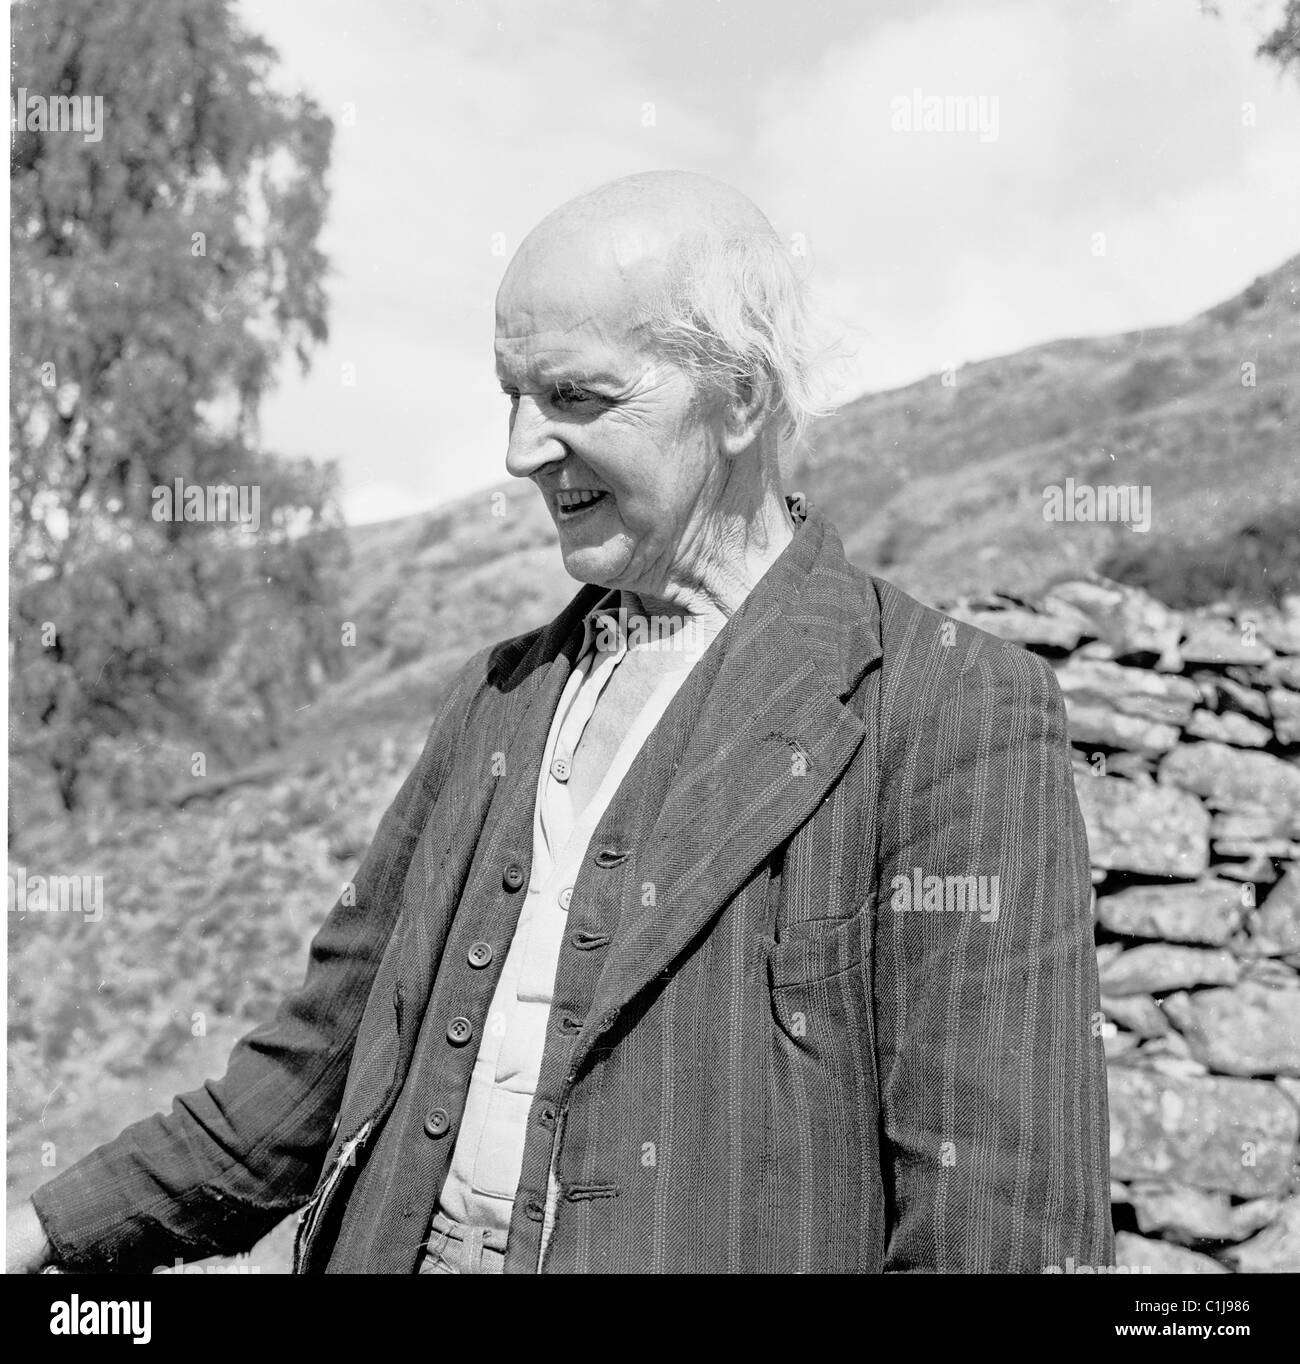 1950s, historical, an elderly man in old, ragged waistcoat and suit jacket standing by a stone wall, a traditional country traveller, England, UK. Stock Photo